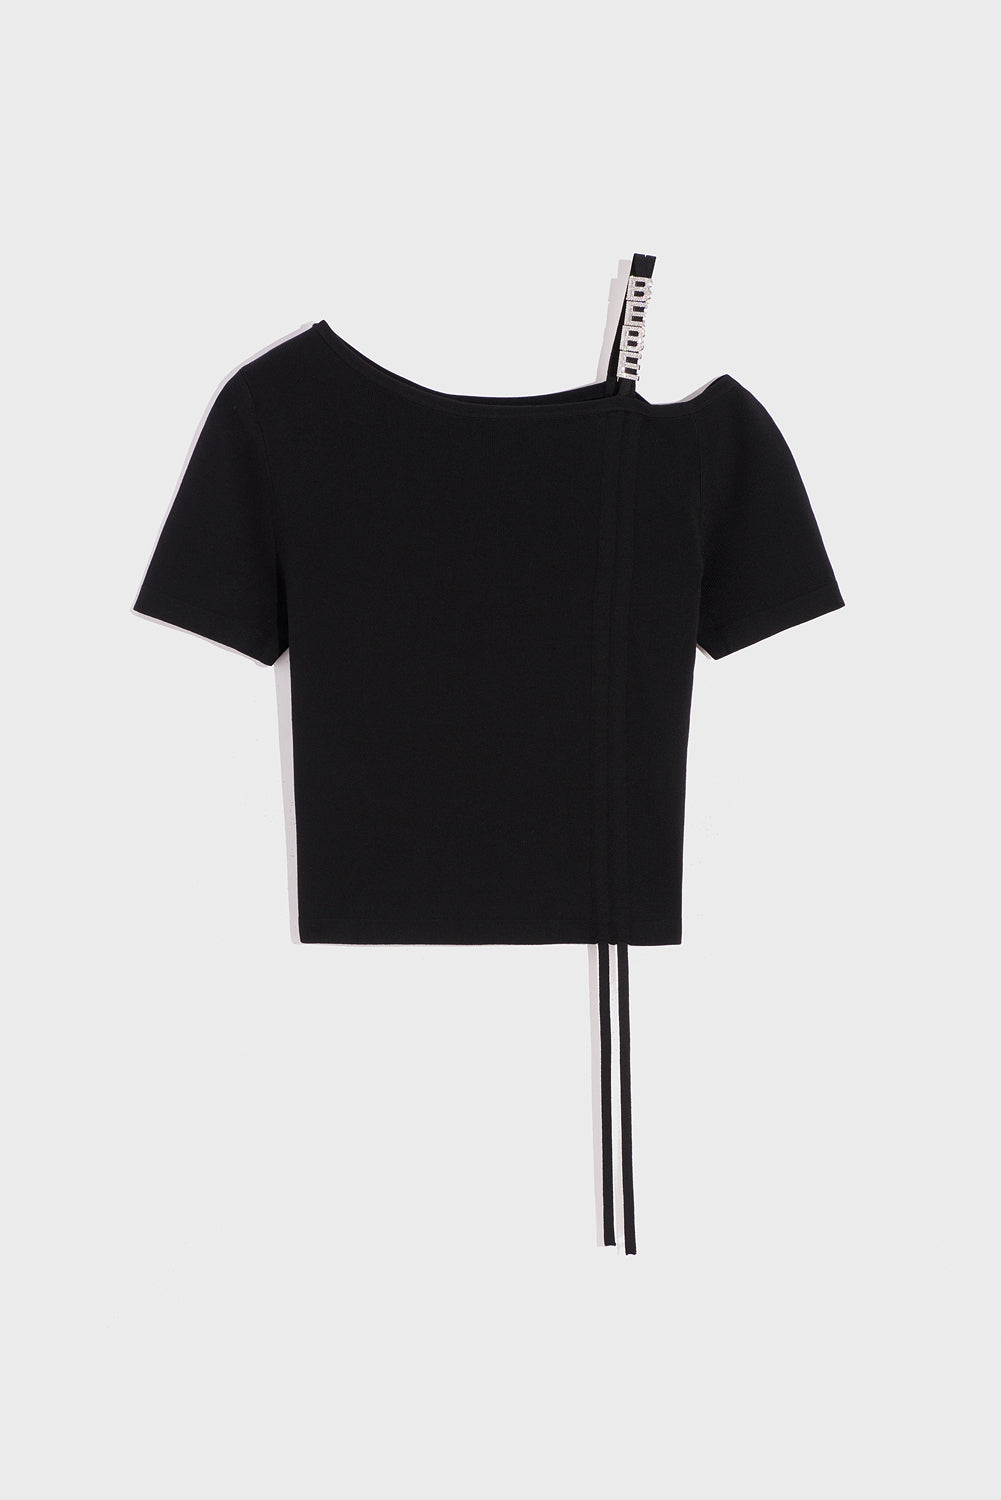 Black T-Shirt Short Sleeve With Side Rouching